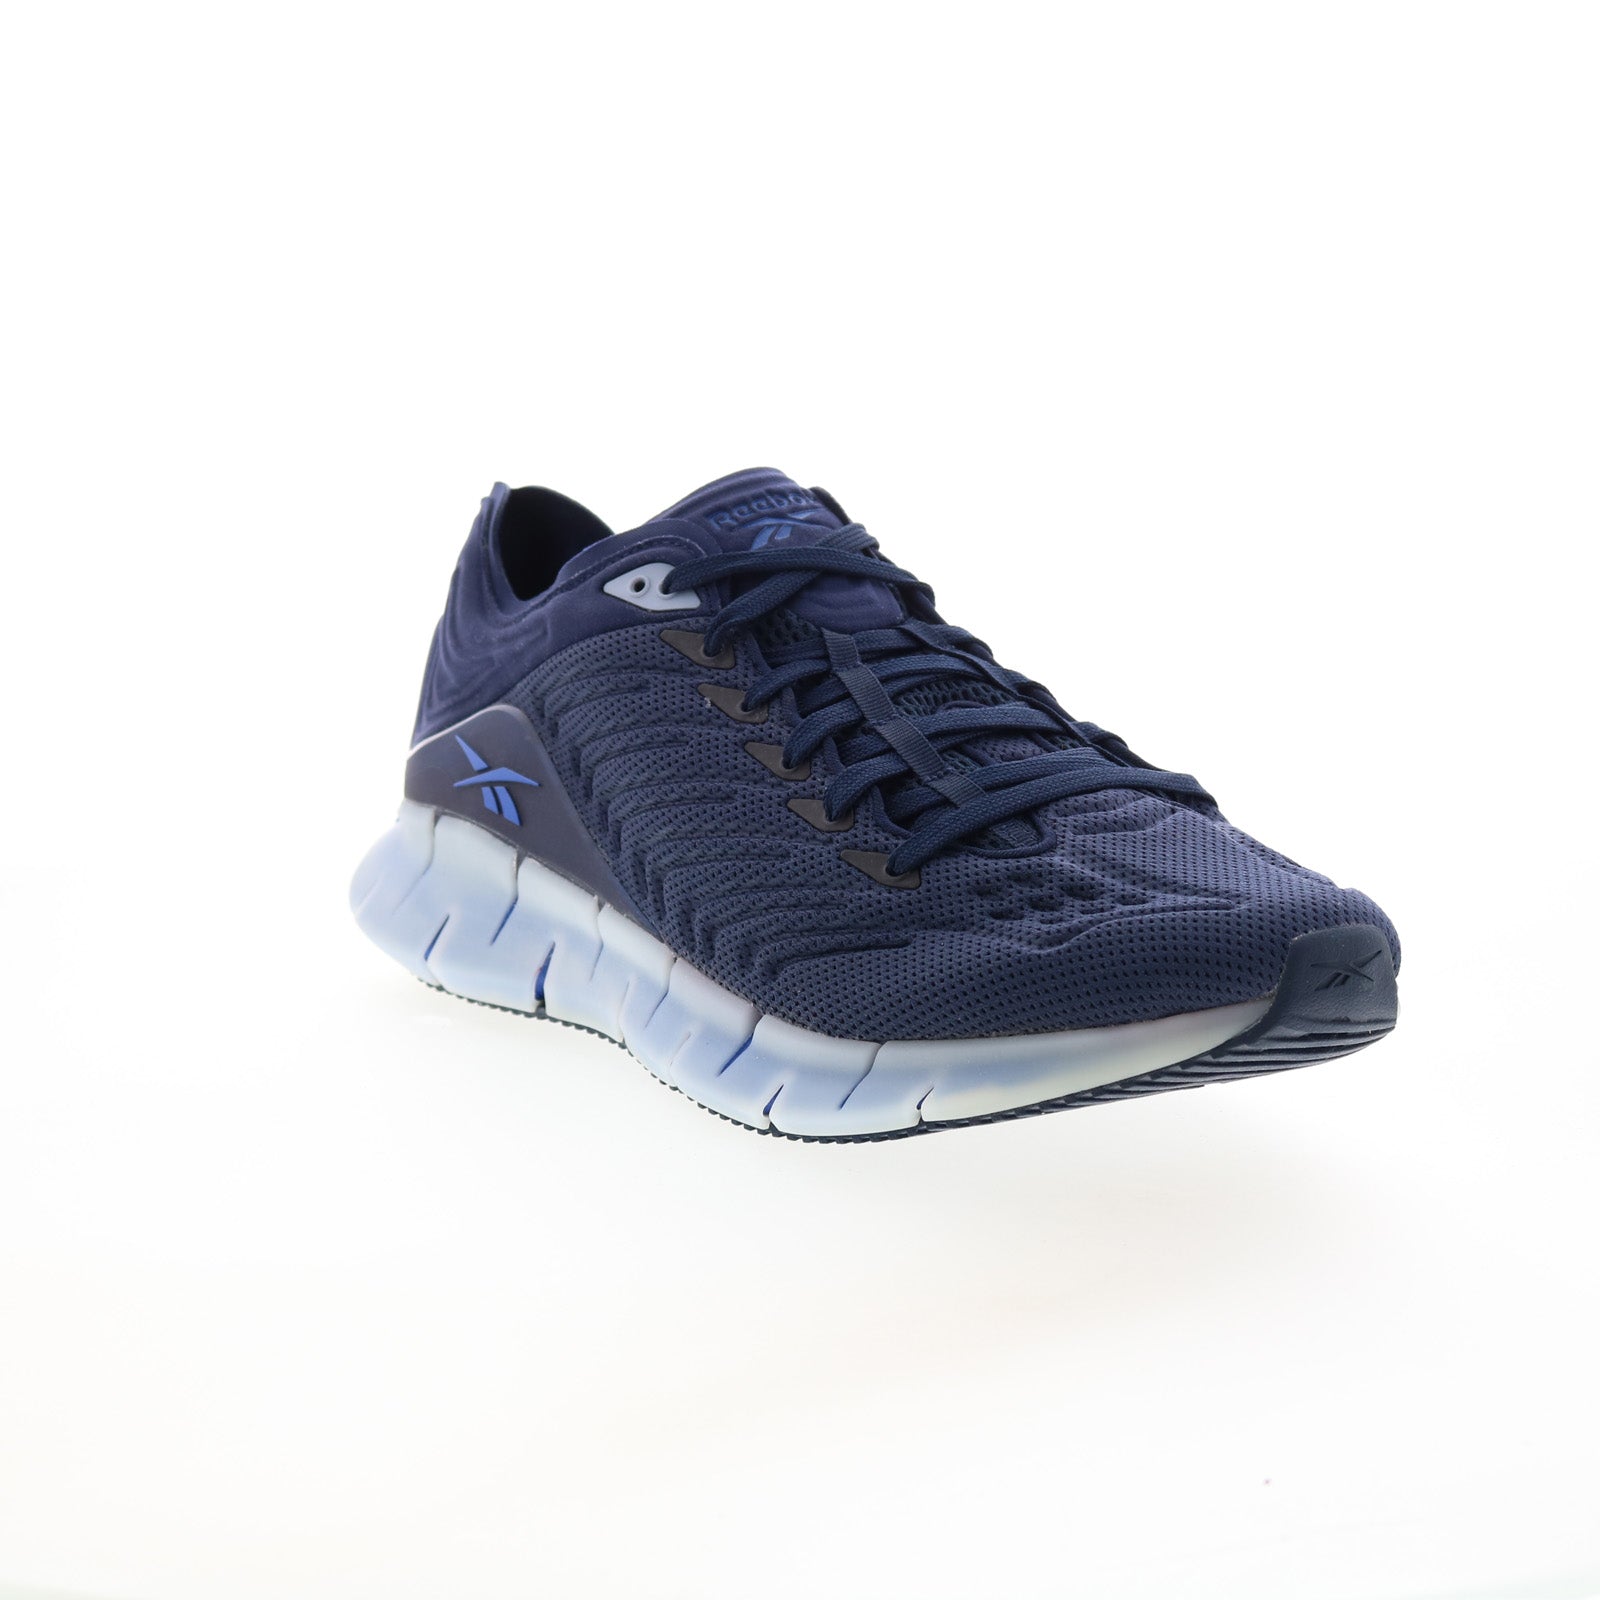 Shoes Athletic Shoes FW5292 Zig Blue Running Canvas Mens - Kinetica Ruze Reebok